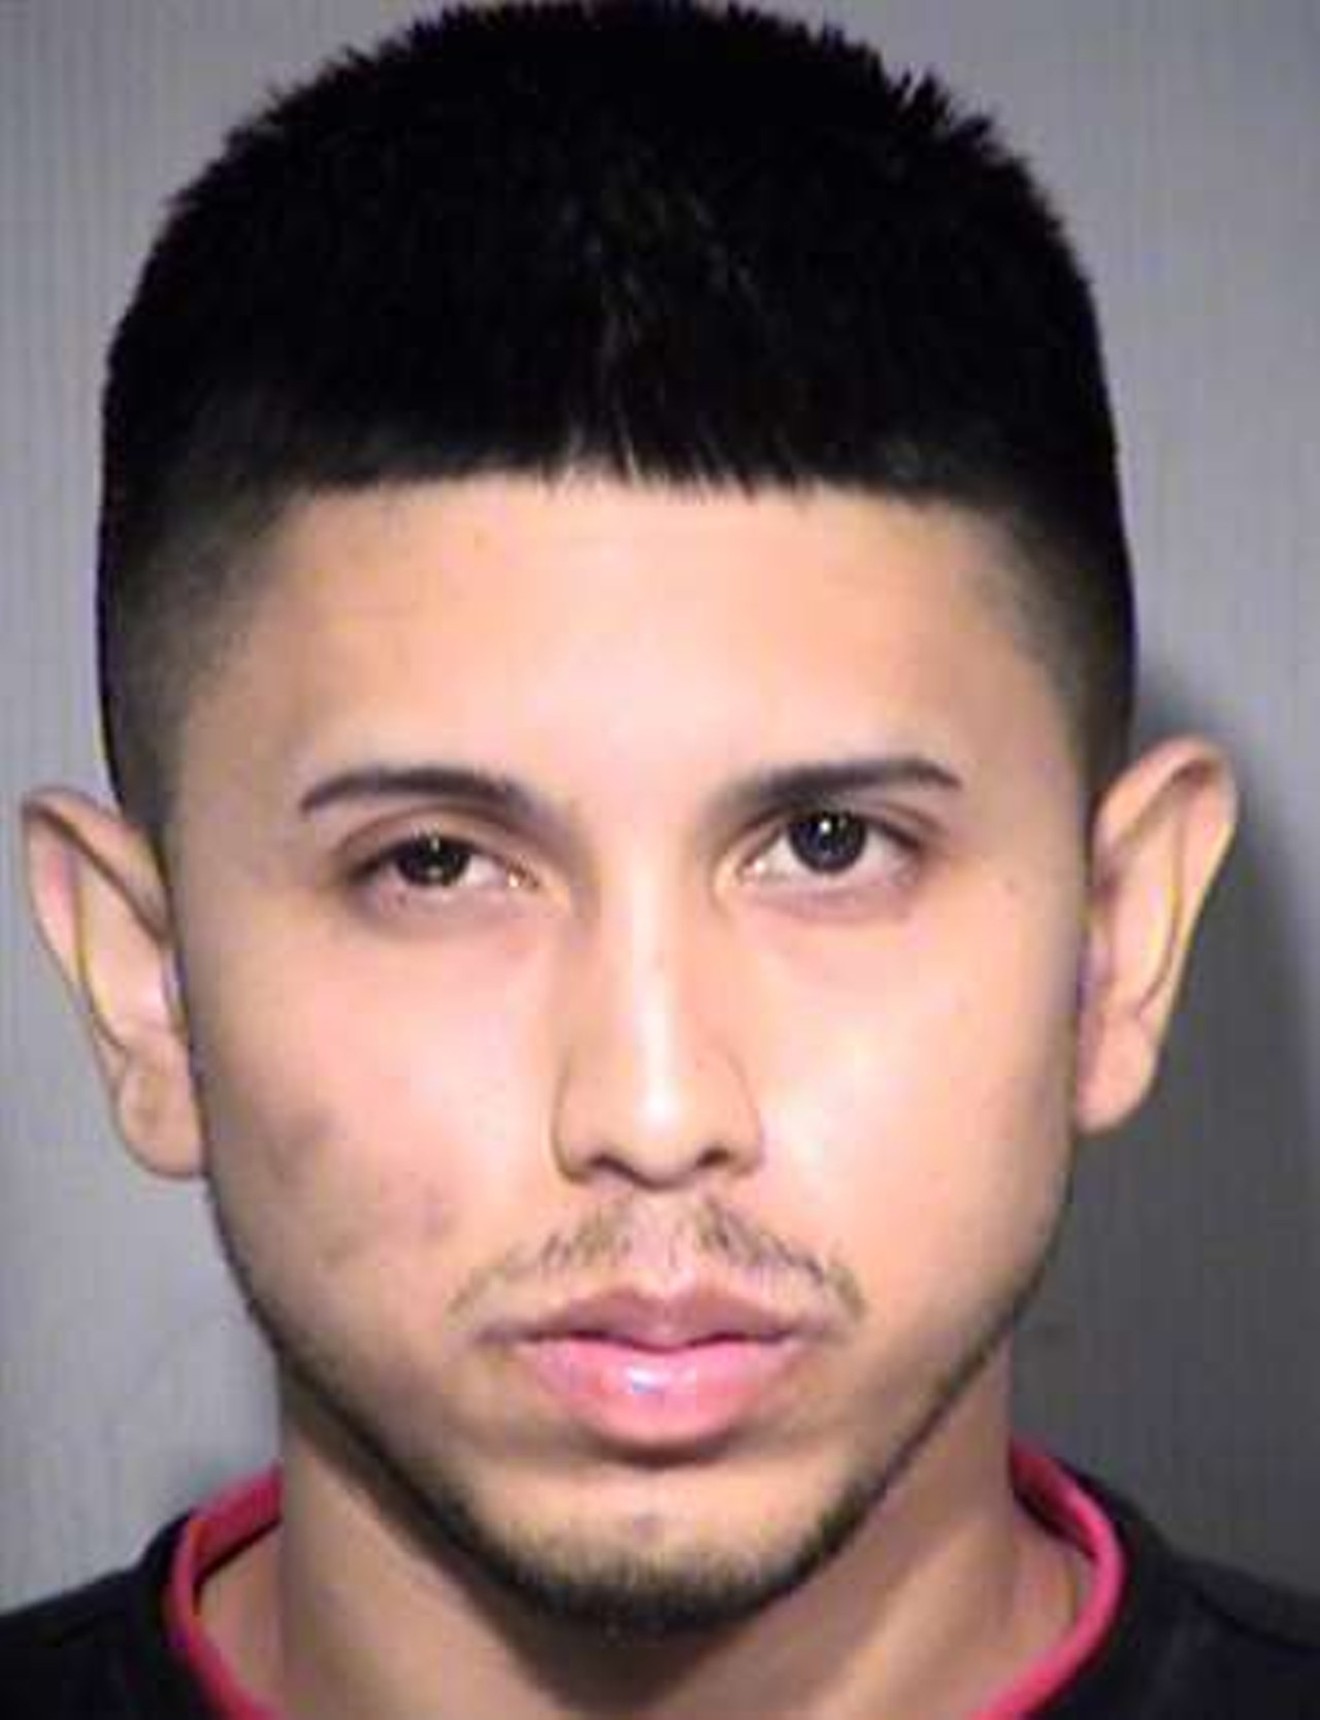 Aaron Juan Saucedo was already in jail when he was first linked to the Serial Street Shooter killings.